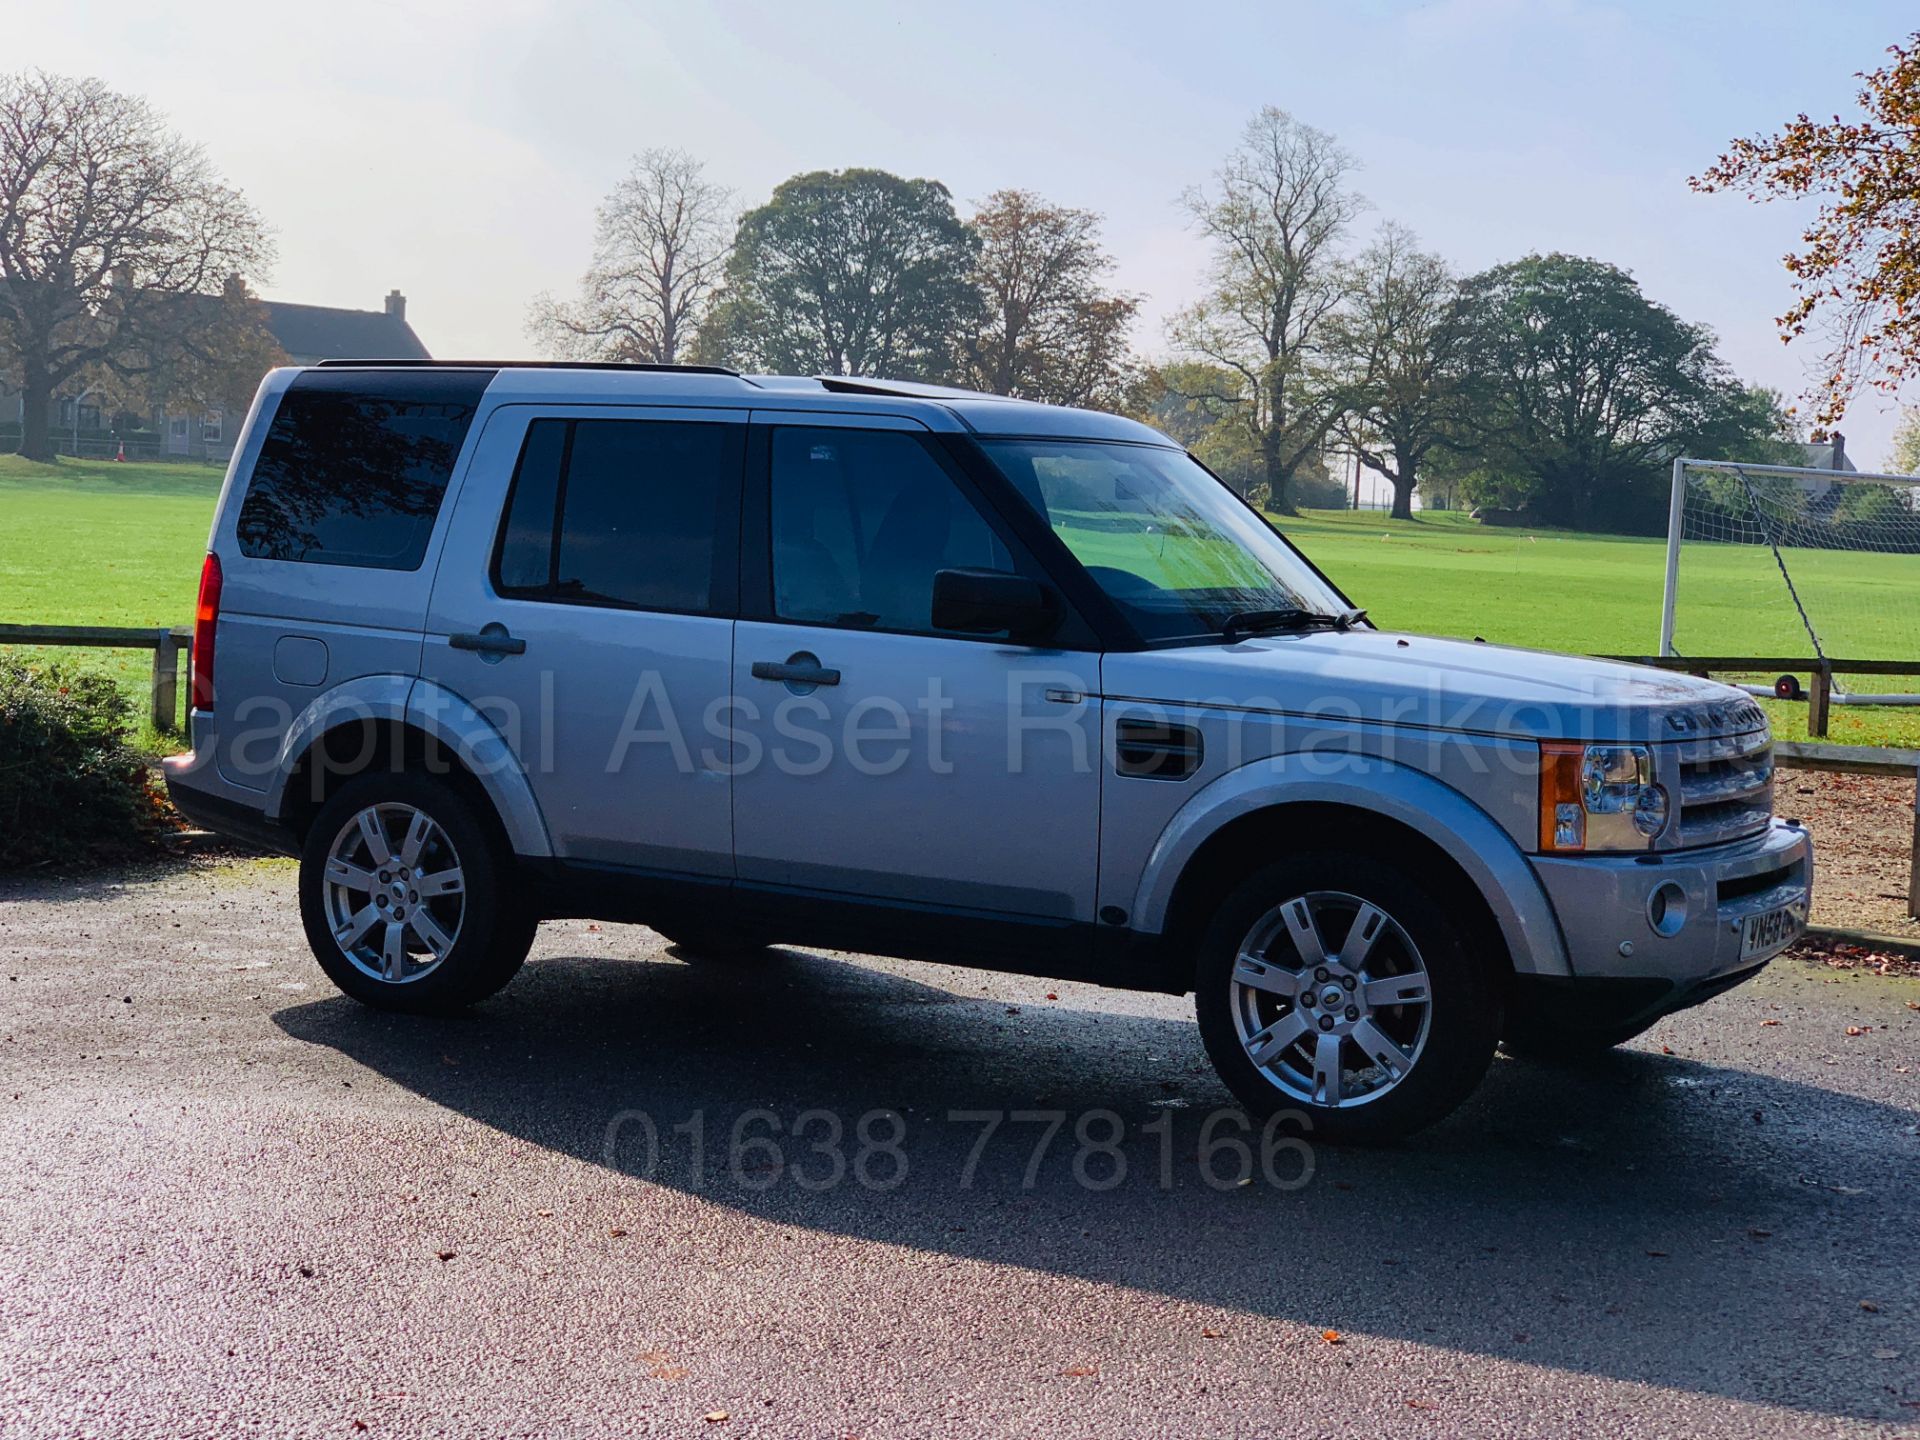 (On Sale) LAND ROVER DISCOVERY *HSE EDITION* (2009 MODEL) 'TDV6 - 190 BHP - AUTO' **LOOK** (NO VAT) - Image 9 of 53